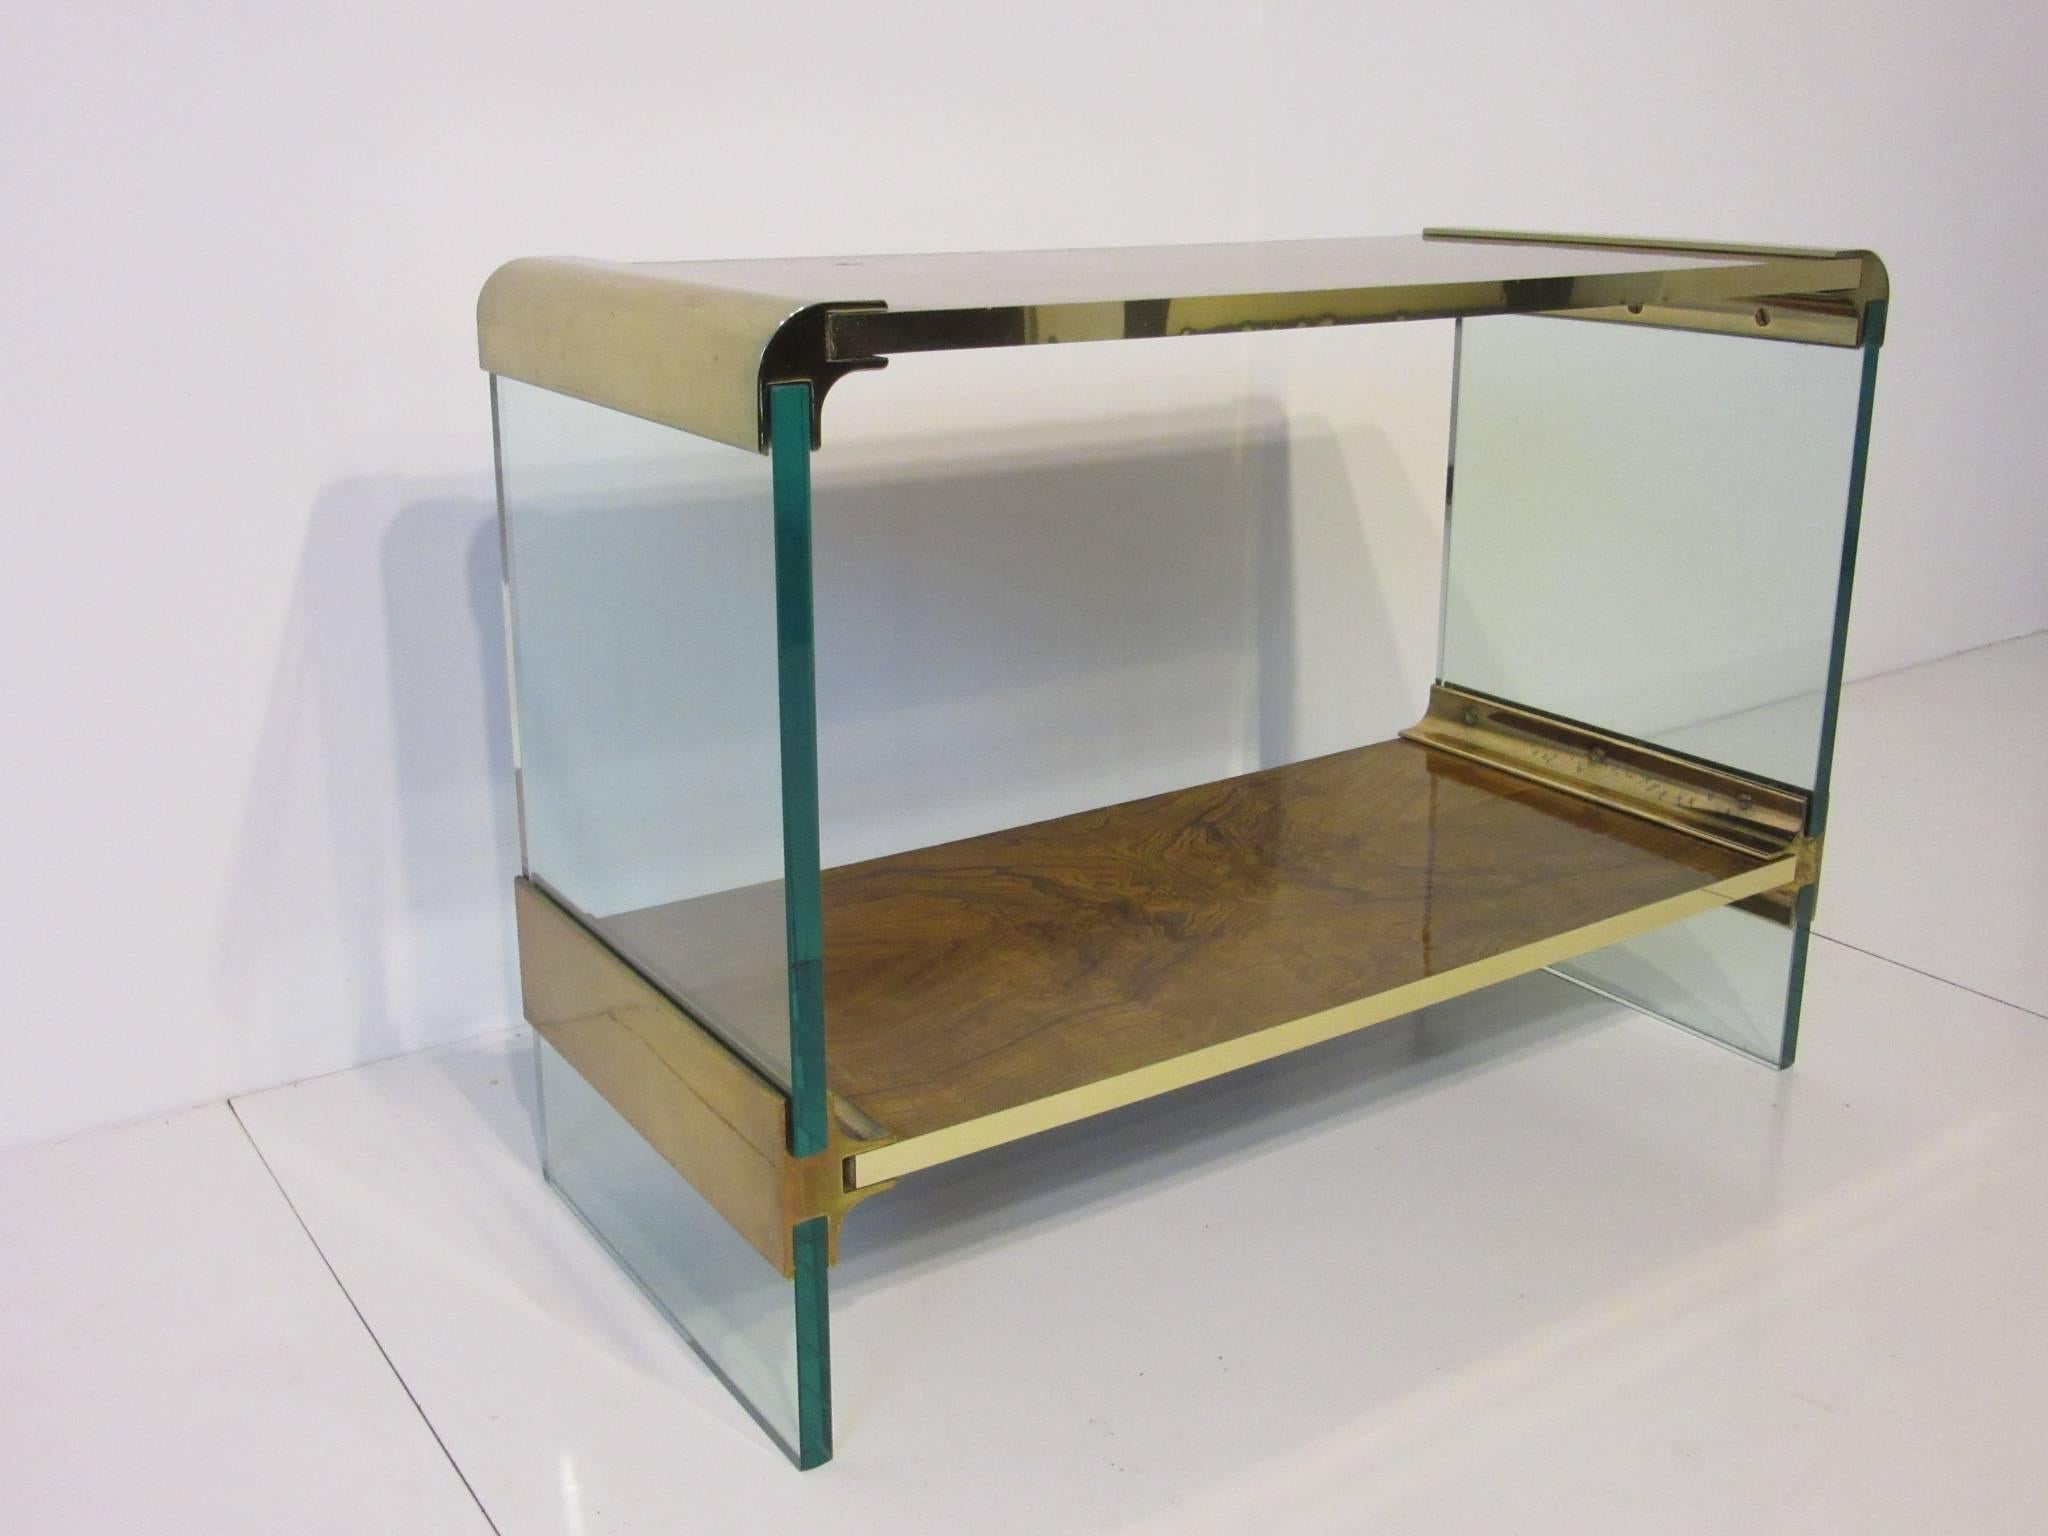 A rare smaller sized plate glass and brass console table with dark burl wood and brass trim to the front sides of the shelves. Manufactured by the Pace furniture company.